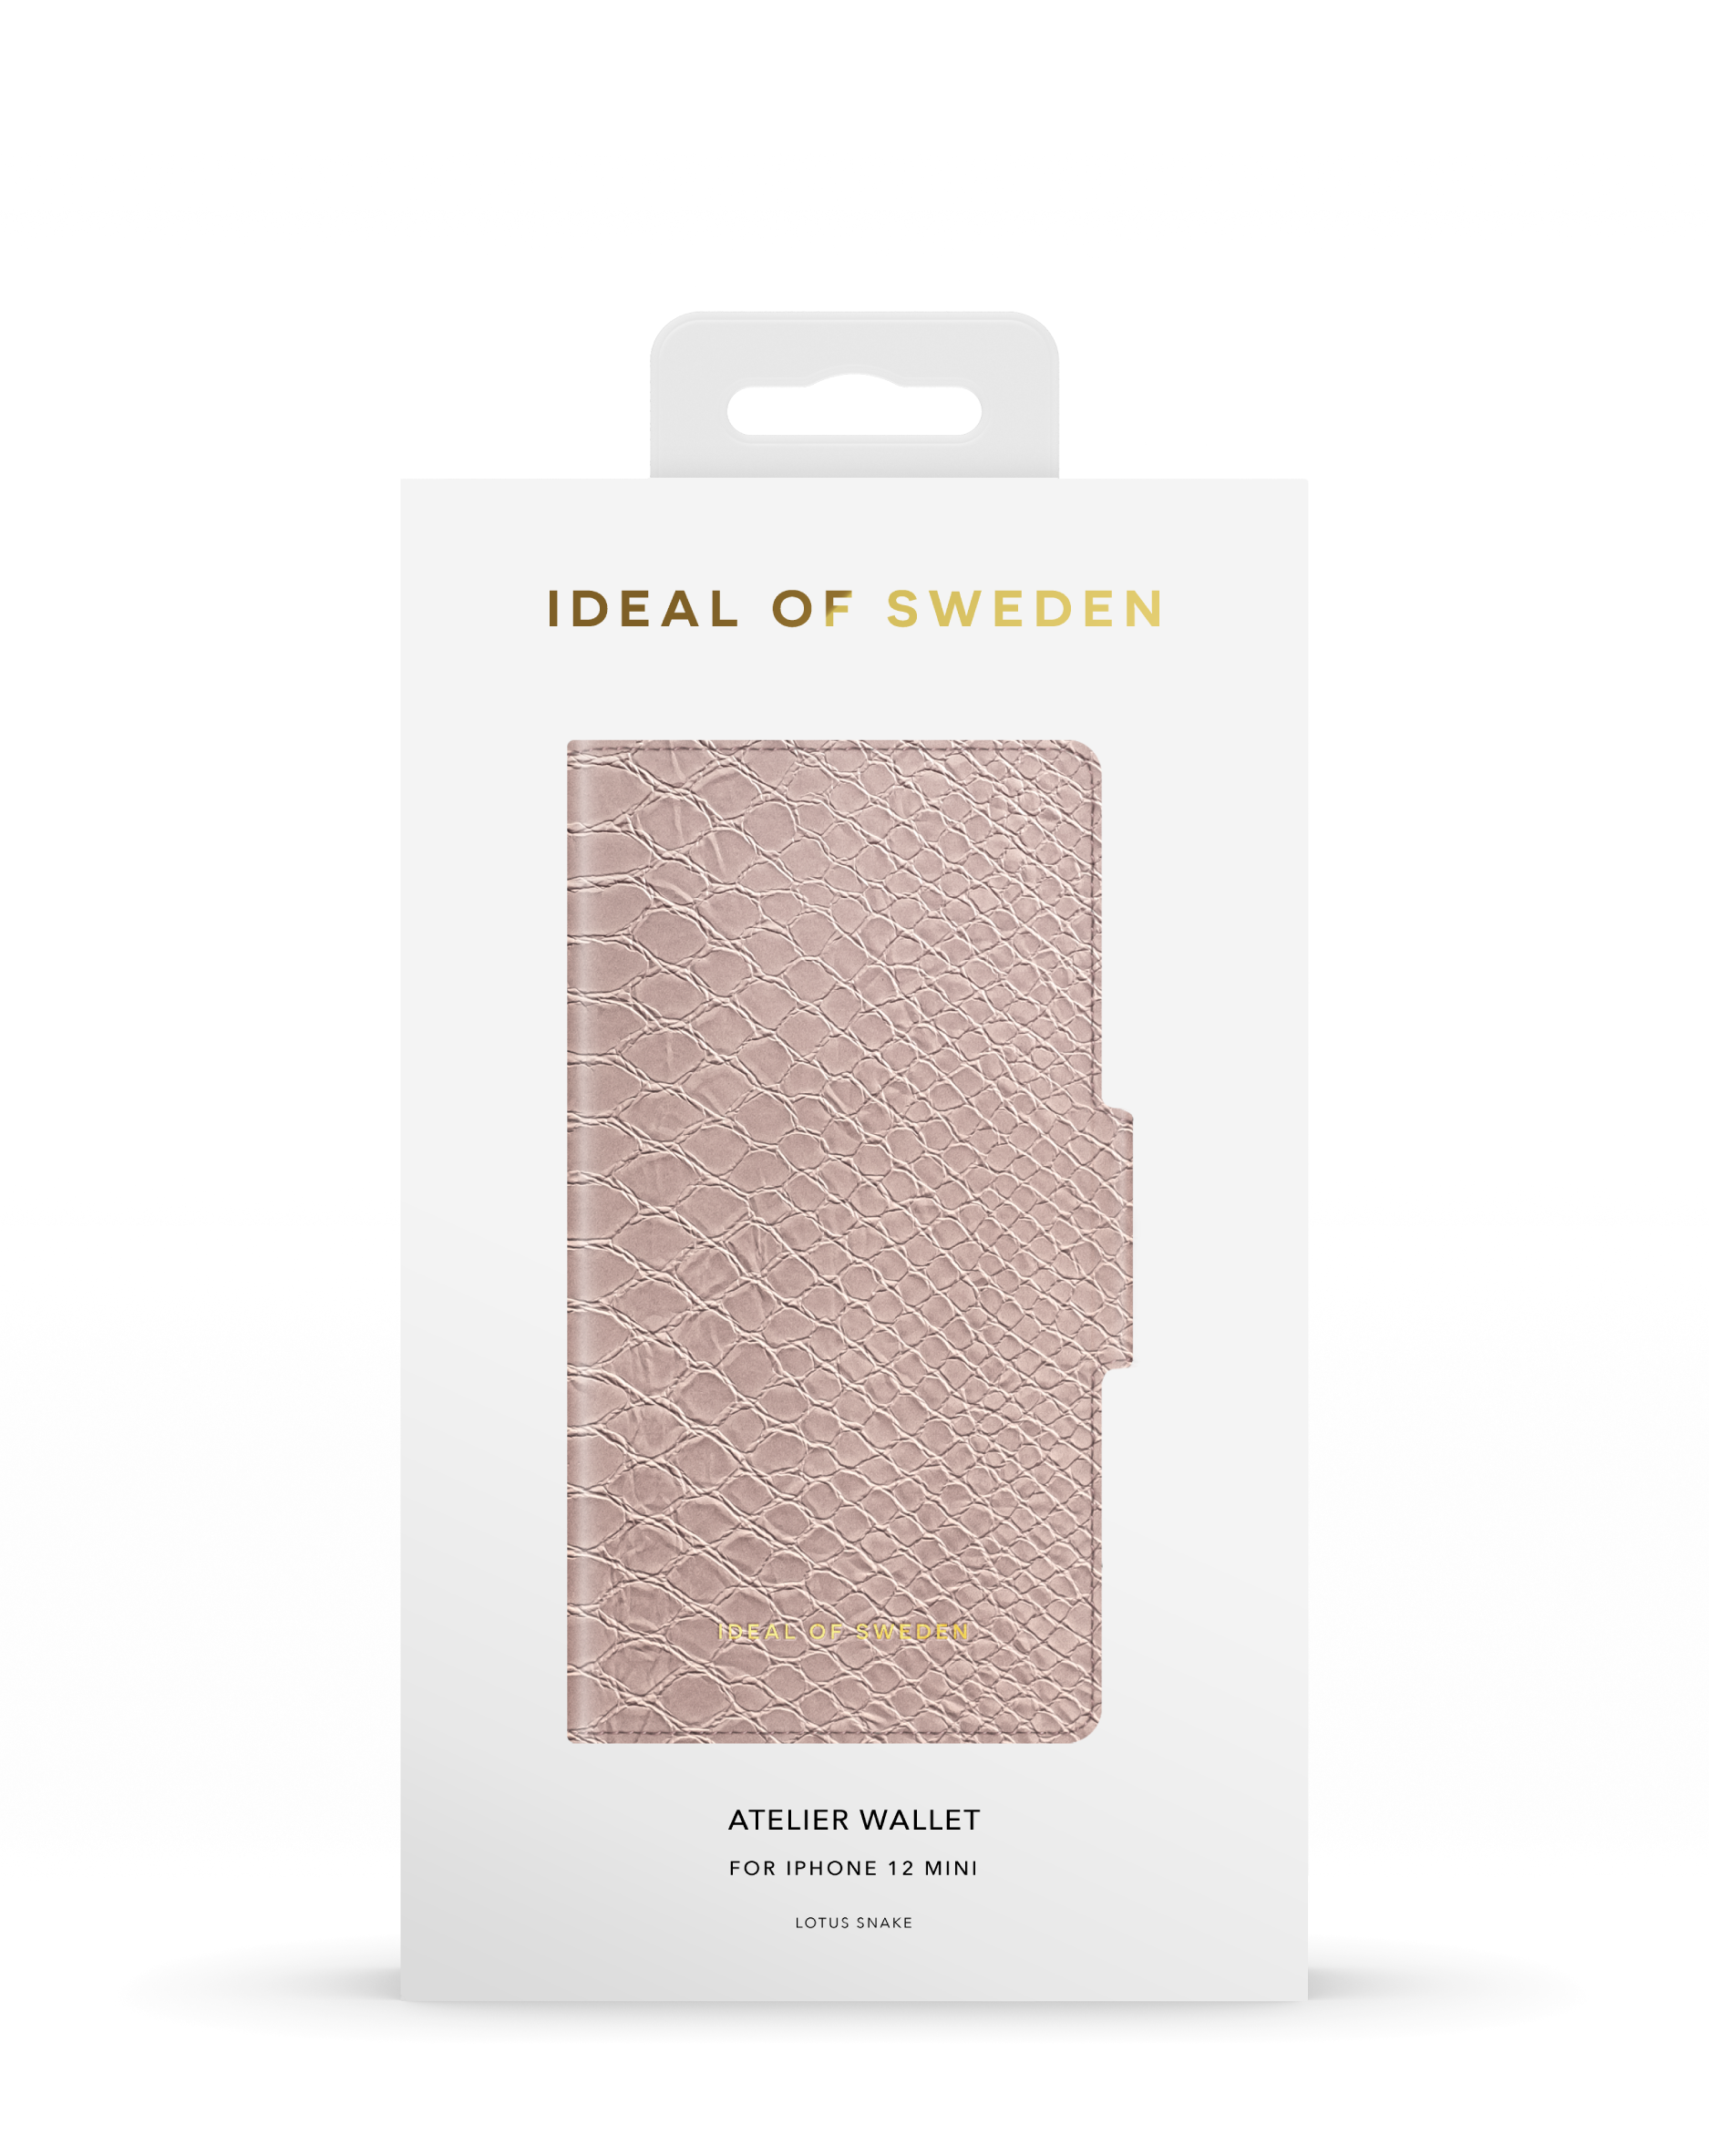 12 Snake Apple, IDAW-I2054-234, mini, IPhone Lotus Bookcover, IDEAL OF SWEDEN